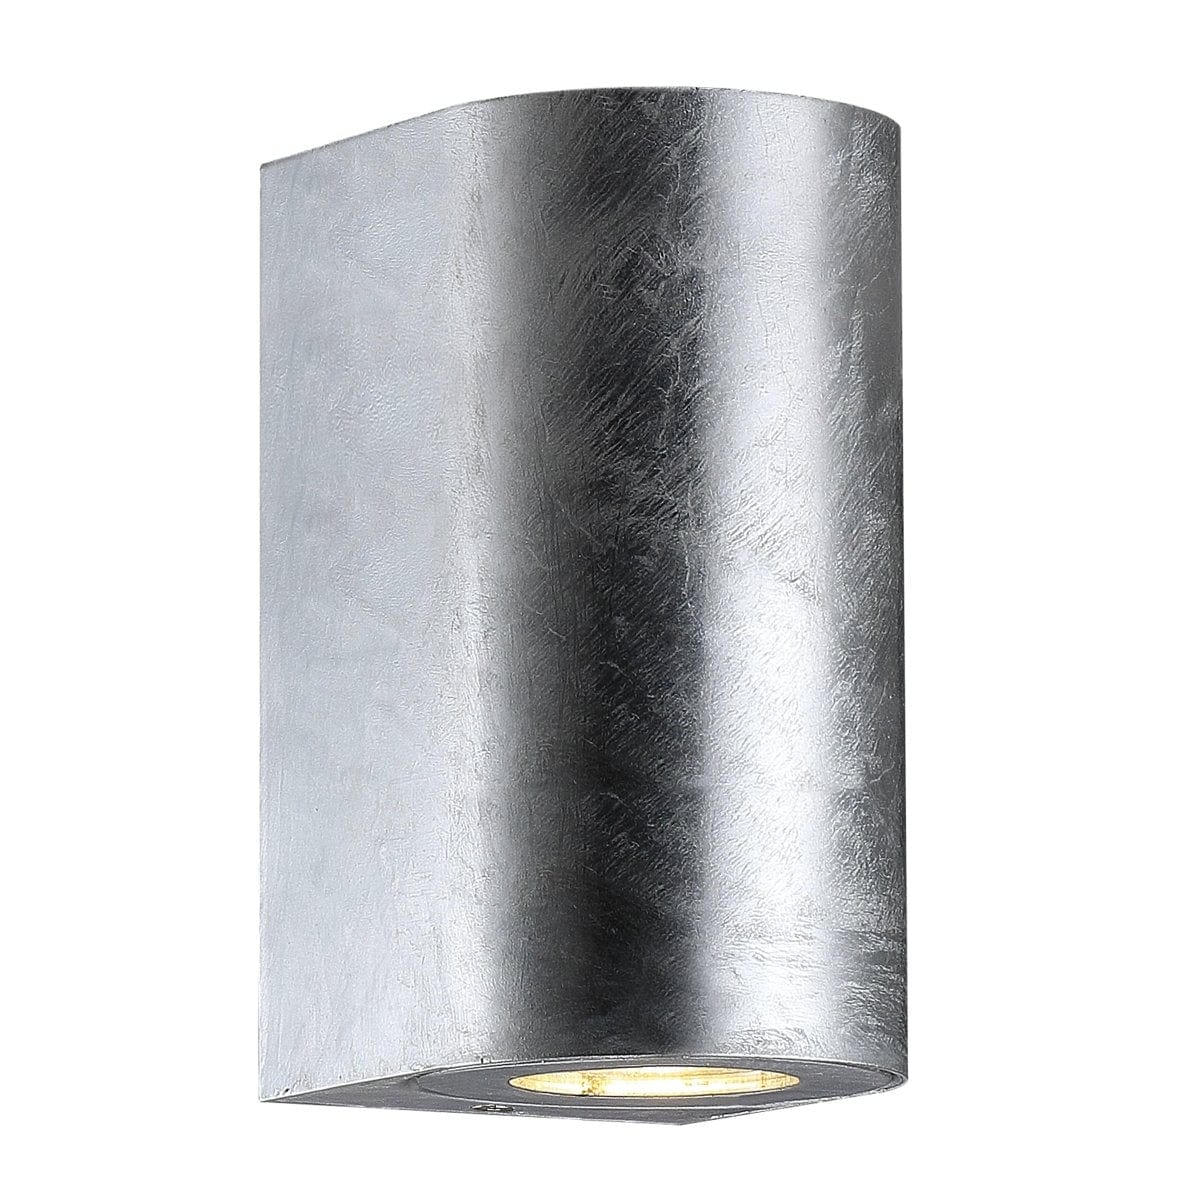 Nordlux Outdoor Lights Galvanised Canto Maxi 2 Outdoor Wall Light